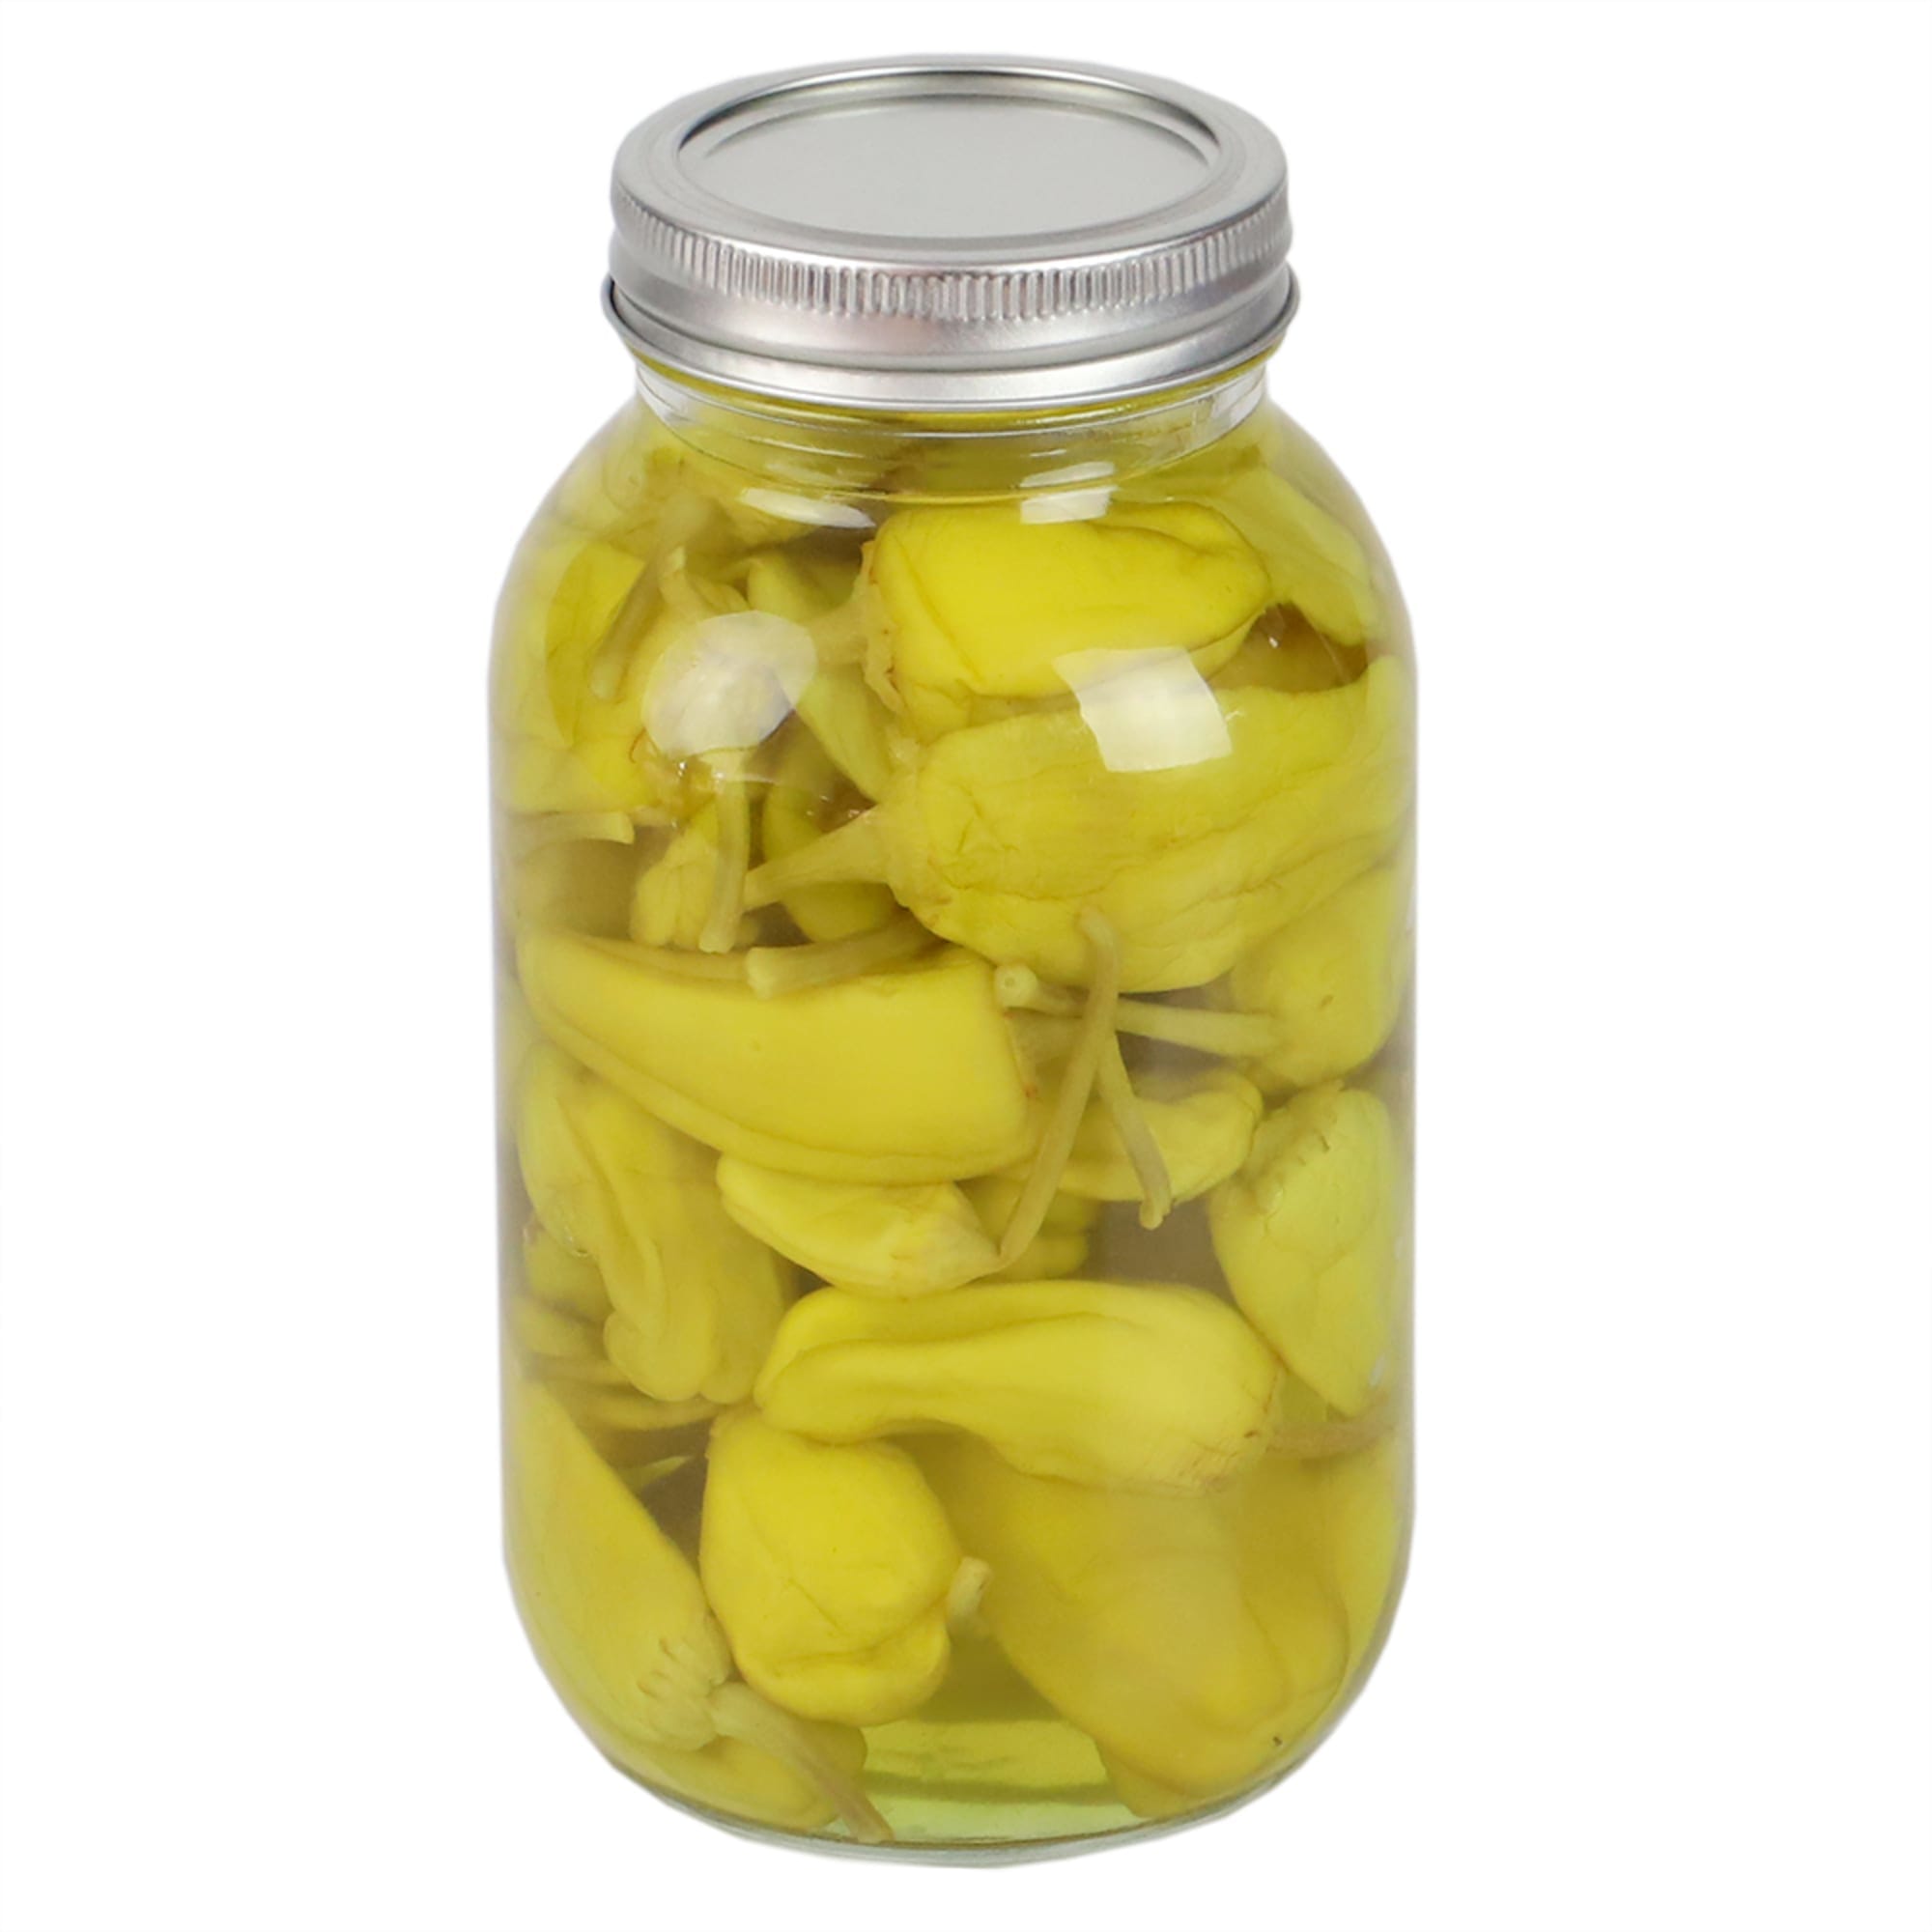 Home Basics 33 oz. Wide Mouth Clear Mason Canning Jar $2.50 EACH, CASE PACK OF 12